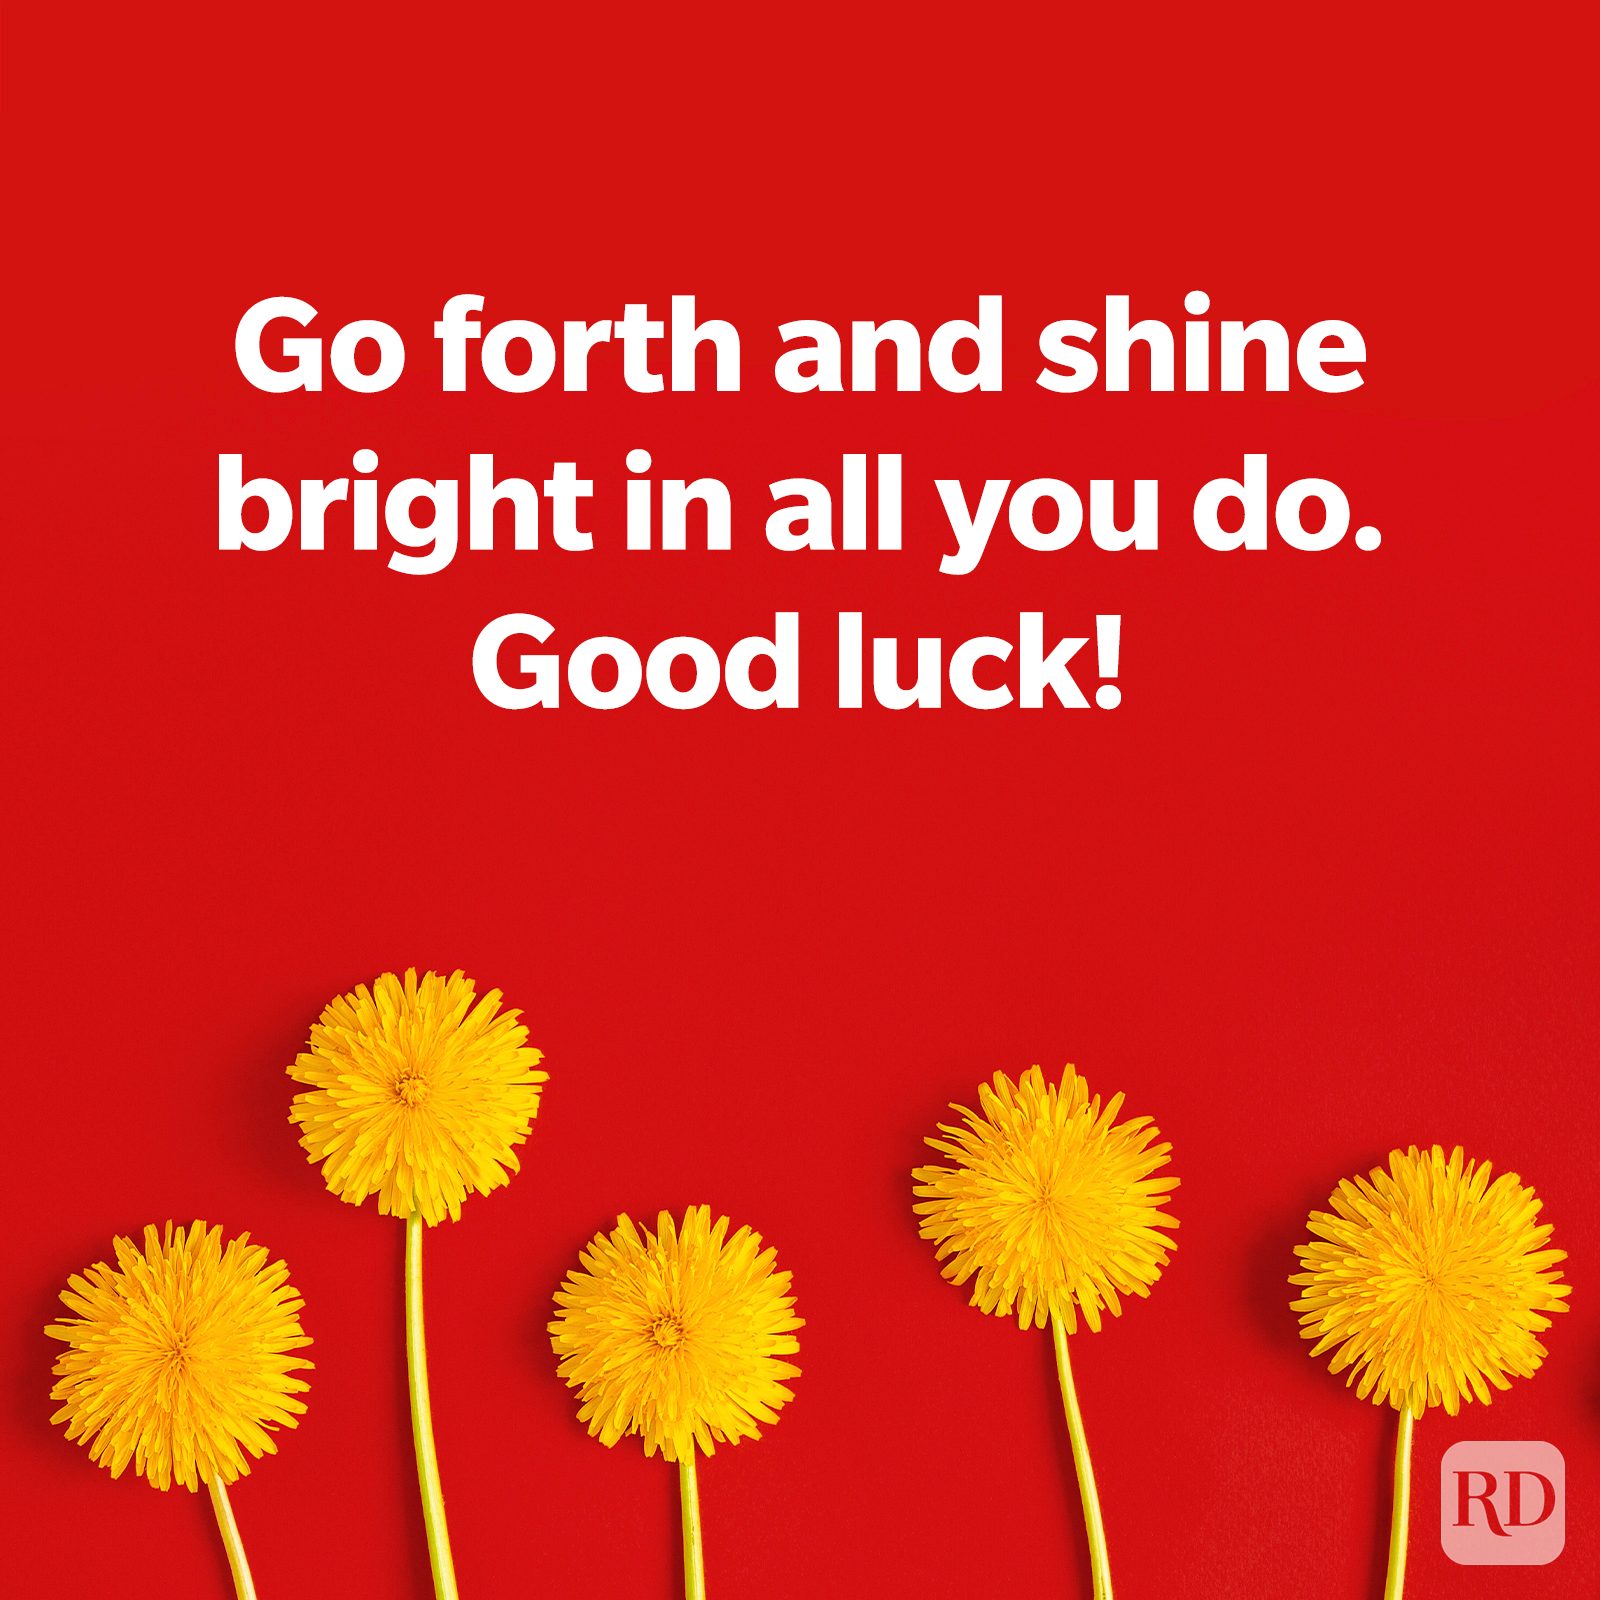 Dandelions on a red background, TEXT: Go forth and shine bright in all you do. Good luck!